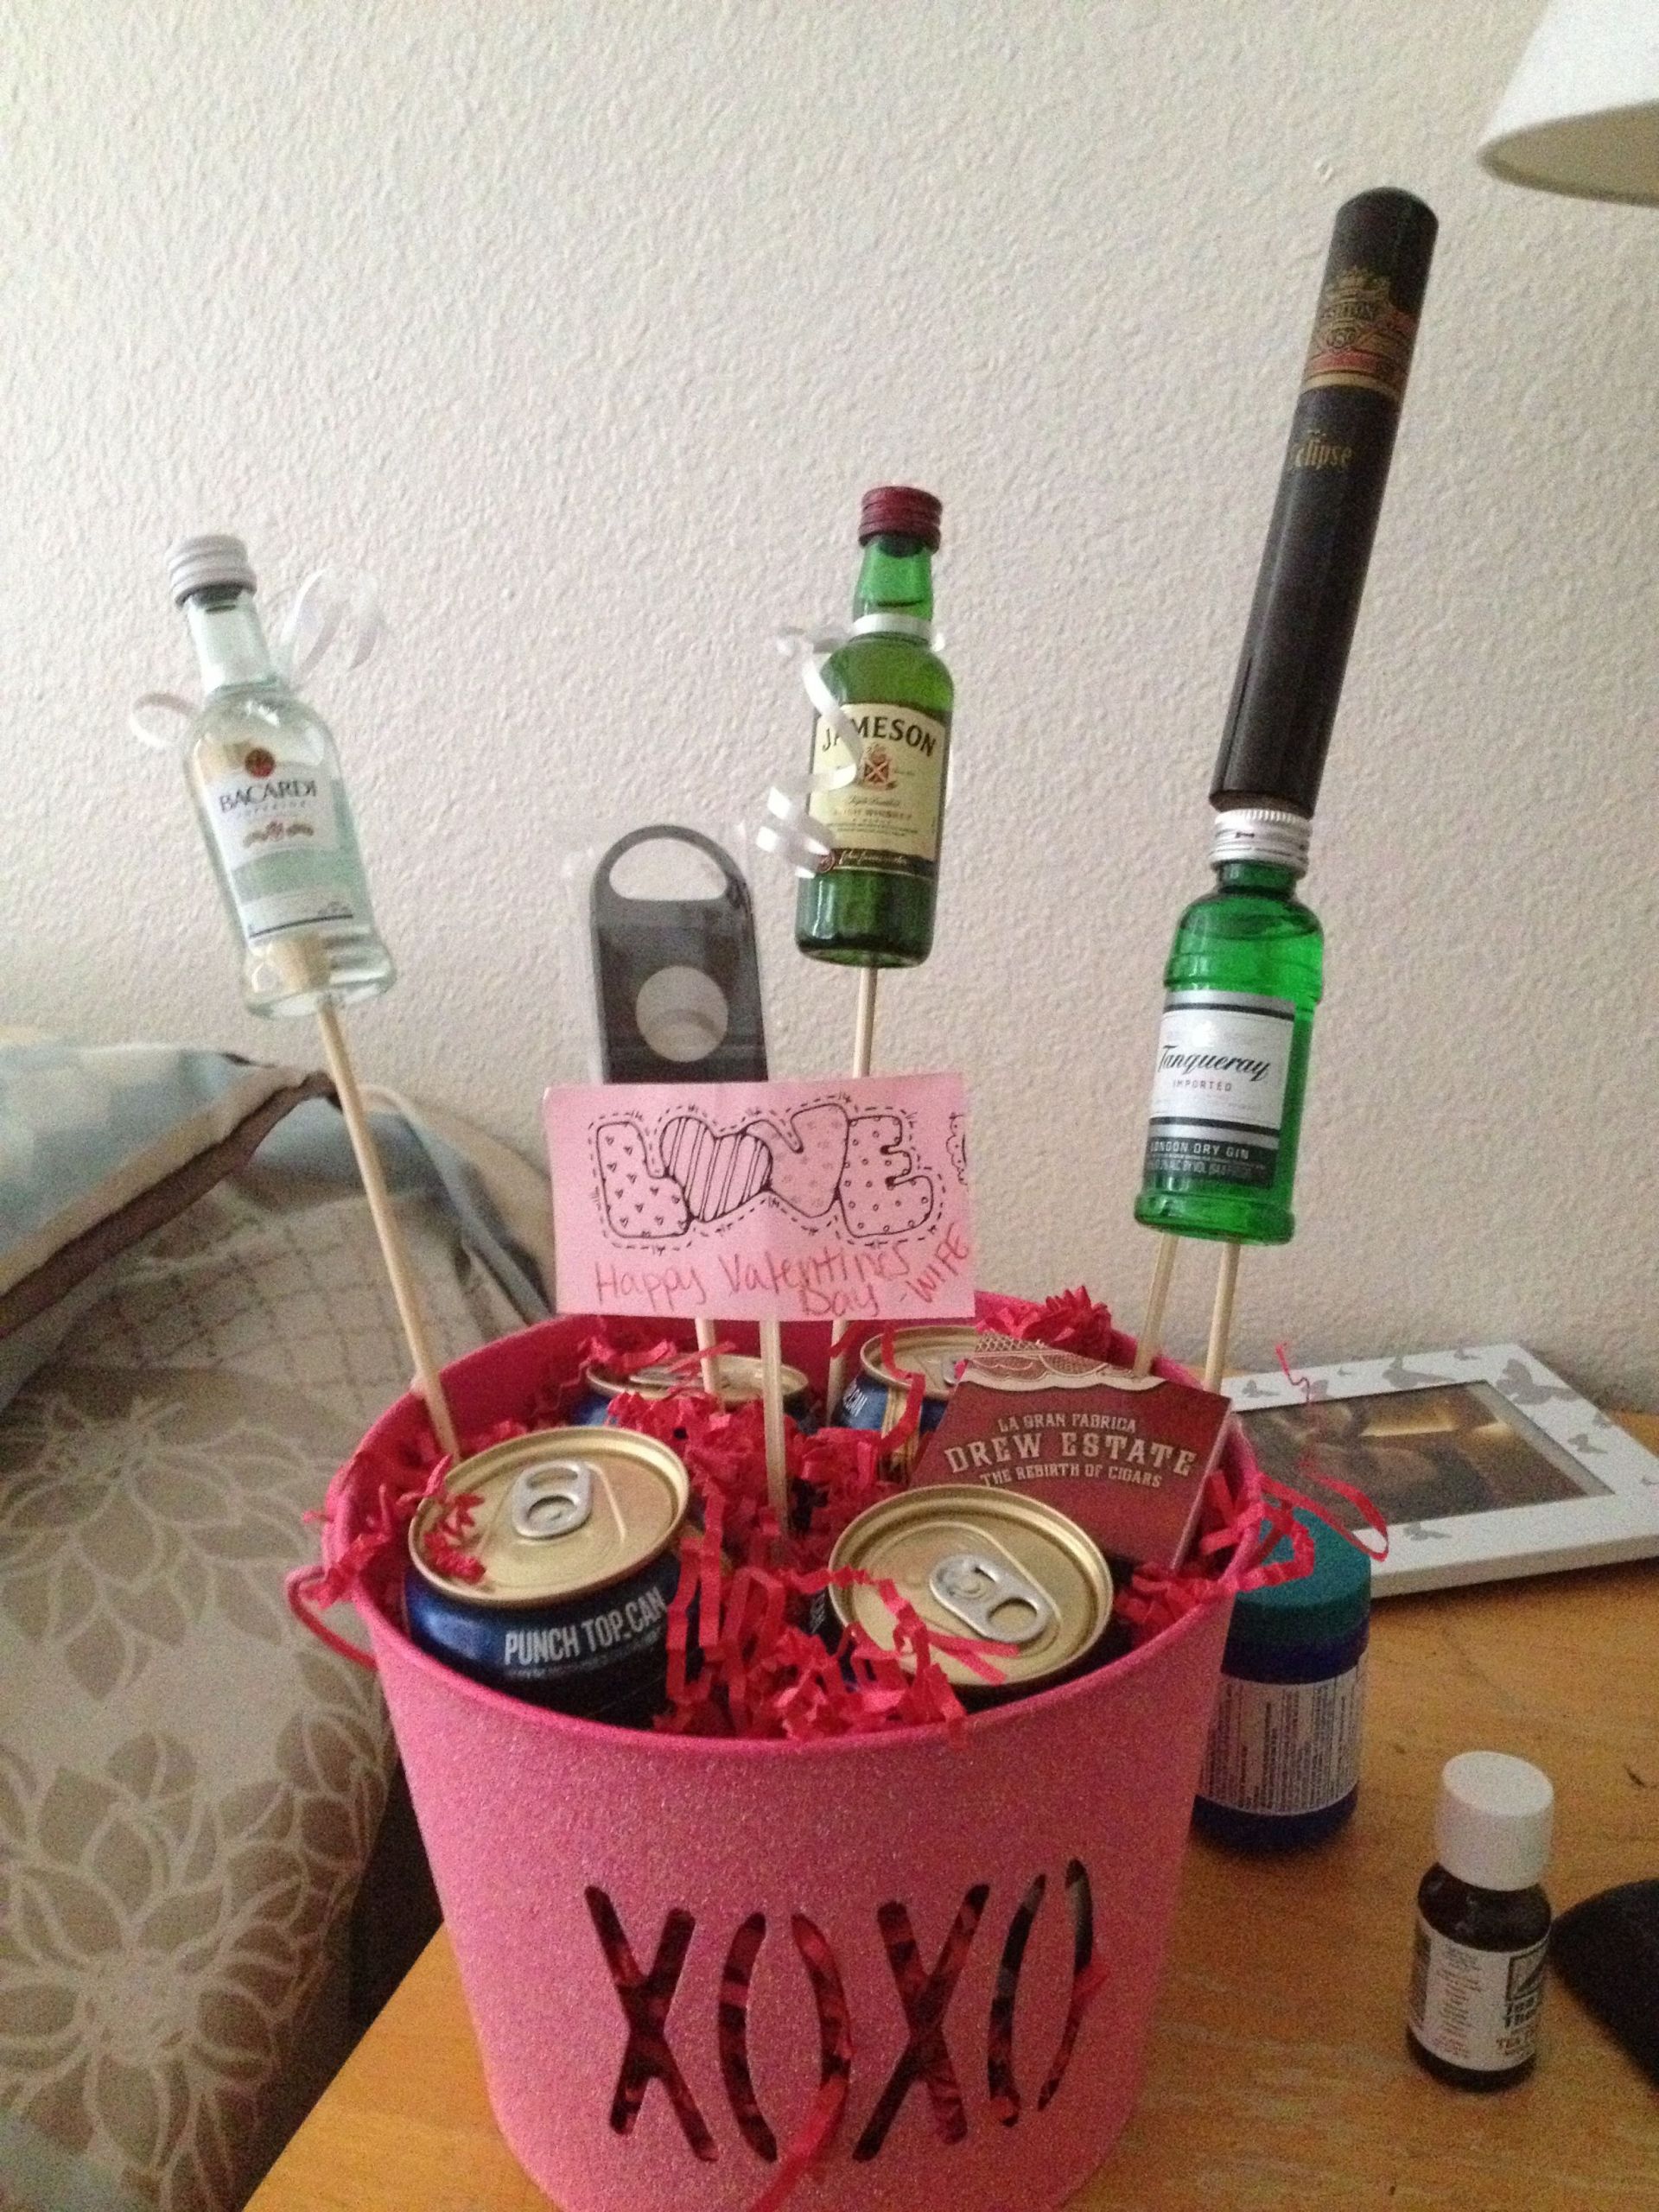 Husband Valentine Gift Ideas
 I would do this in Christmas a theme t for husband